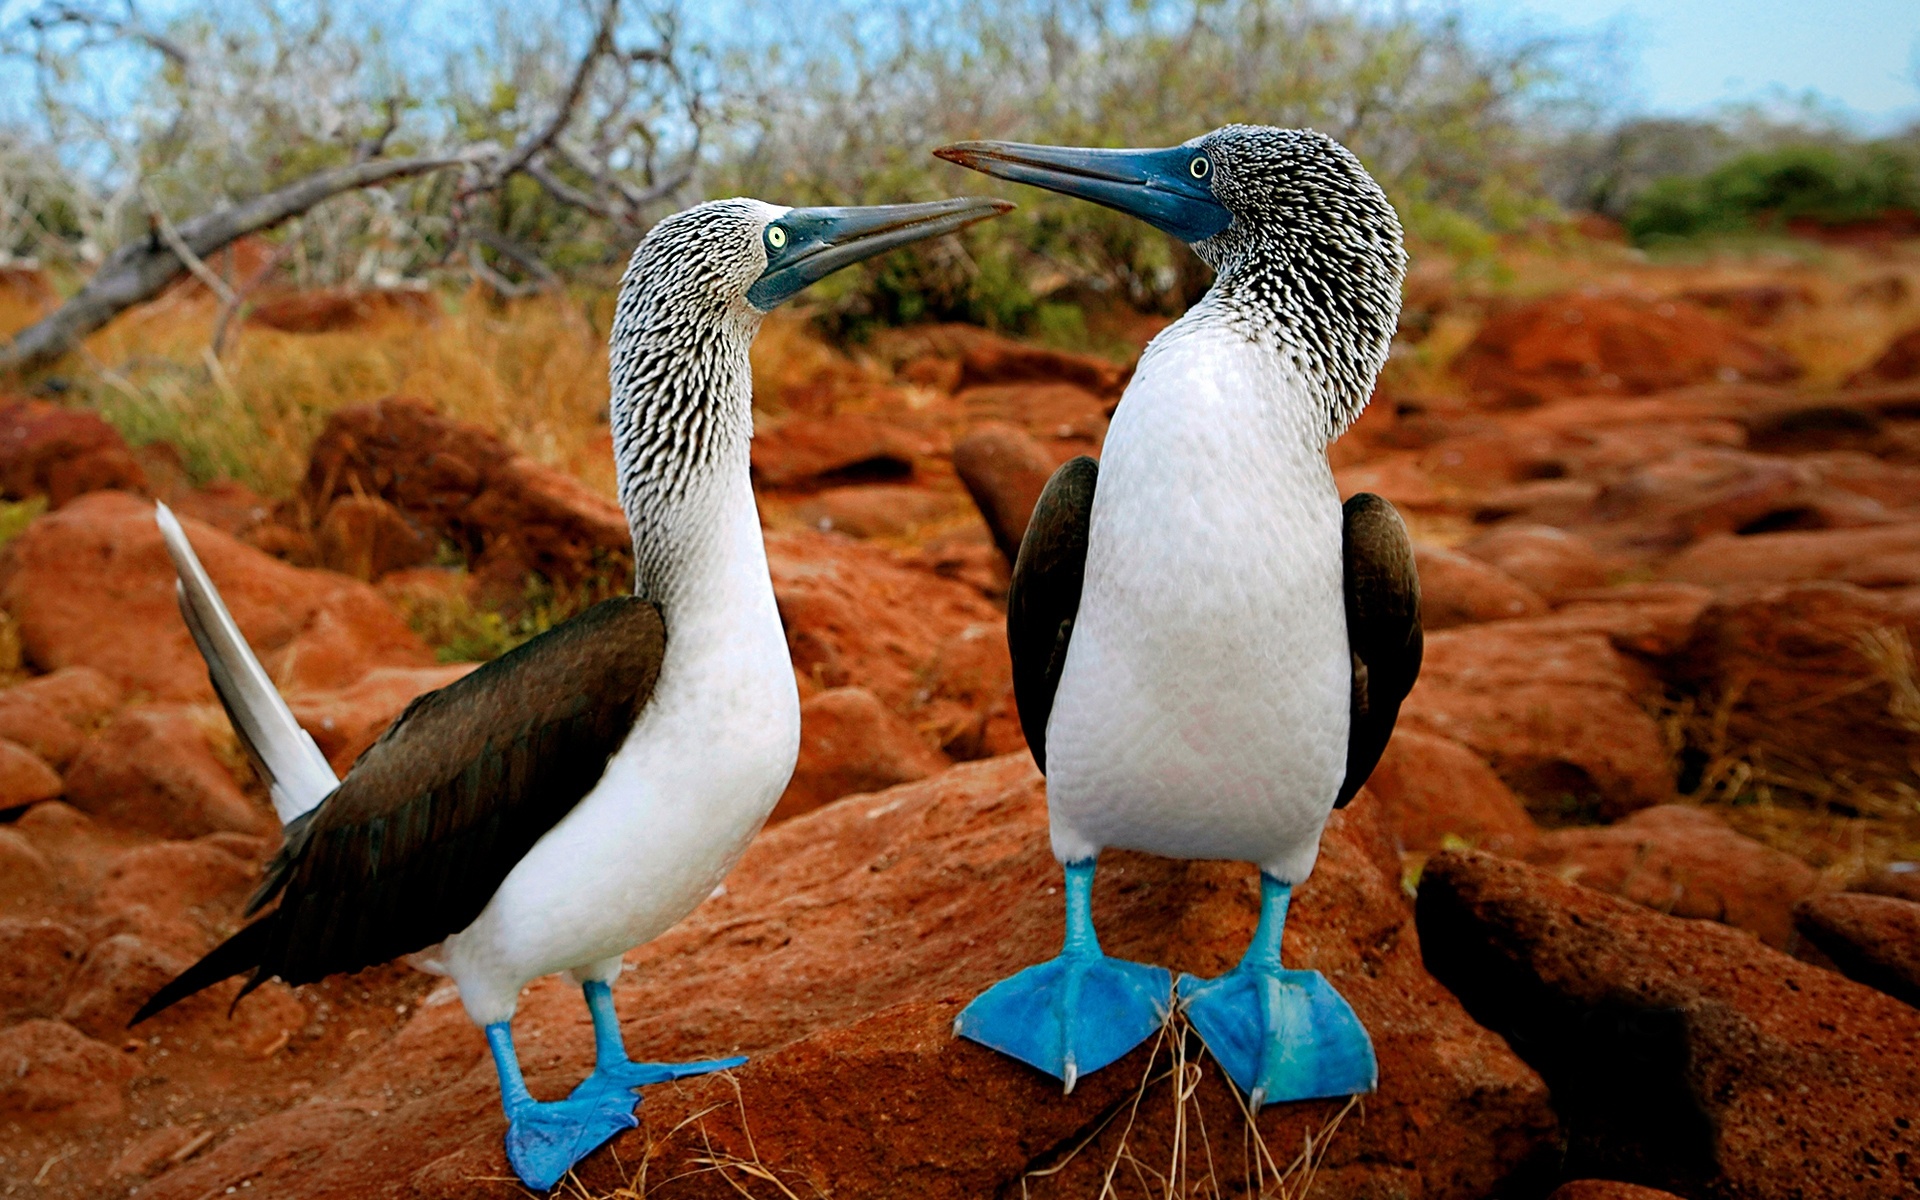  Blue-footed Booby นกบูบีเท้าน้ำเงิน